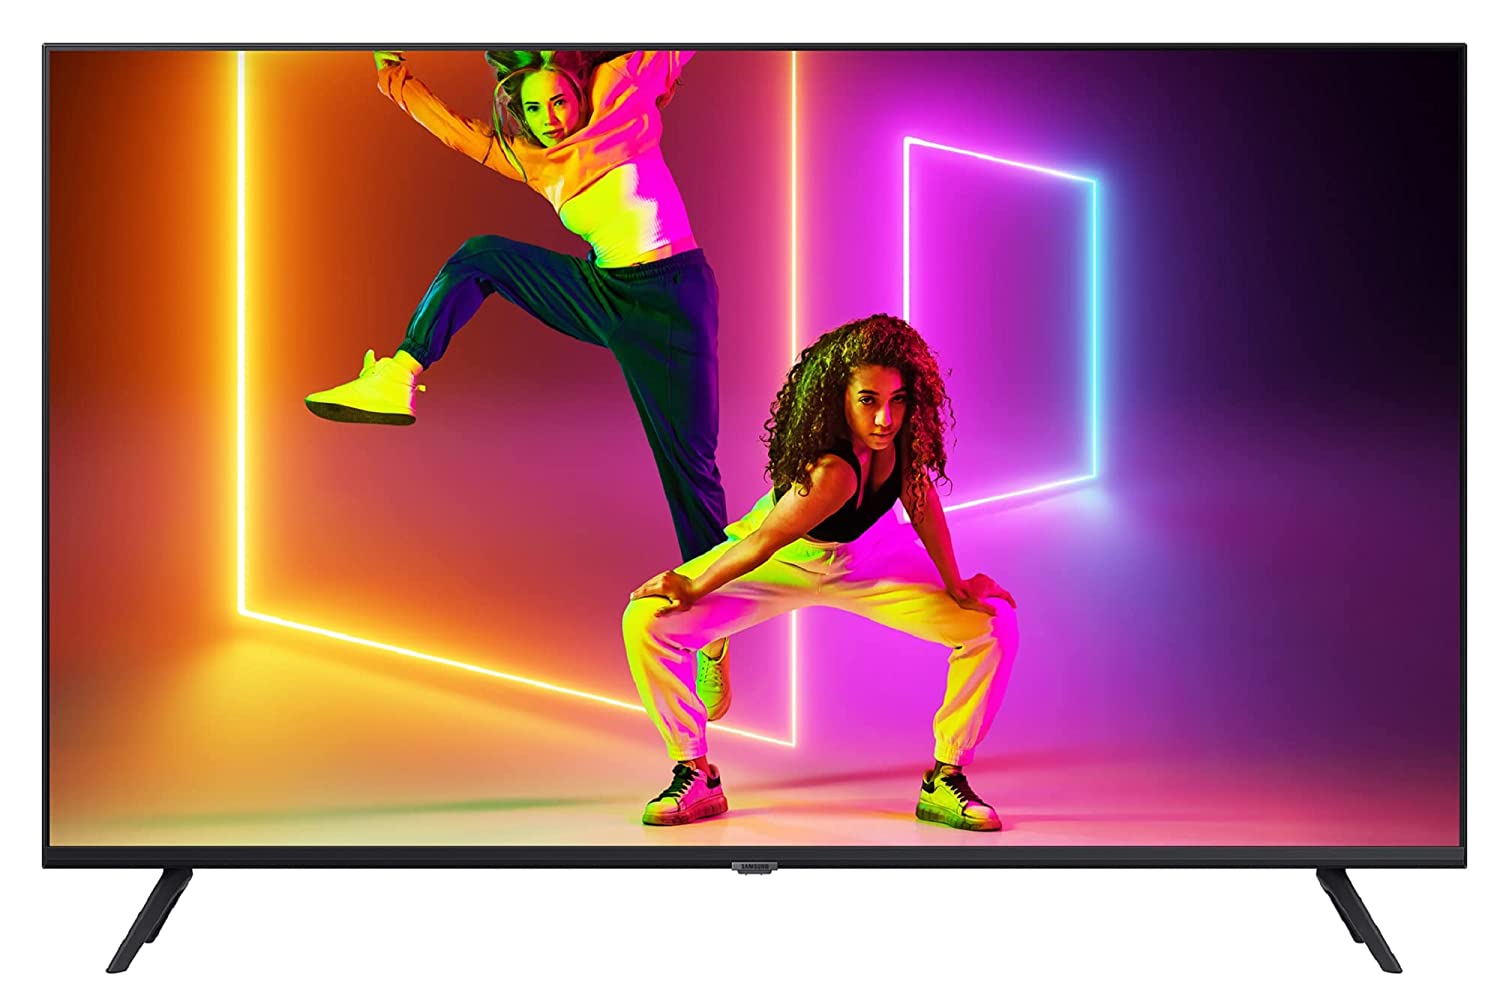 Samsung 43 inches Crystal 4K Pro Series Ultra HD LED TV